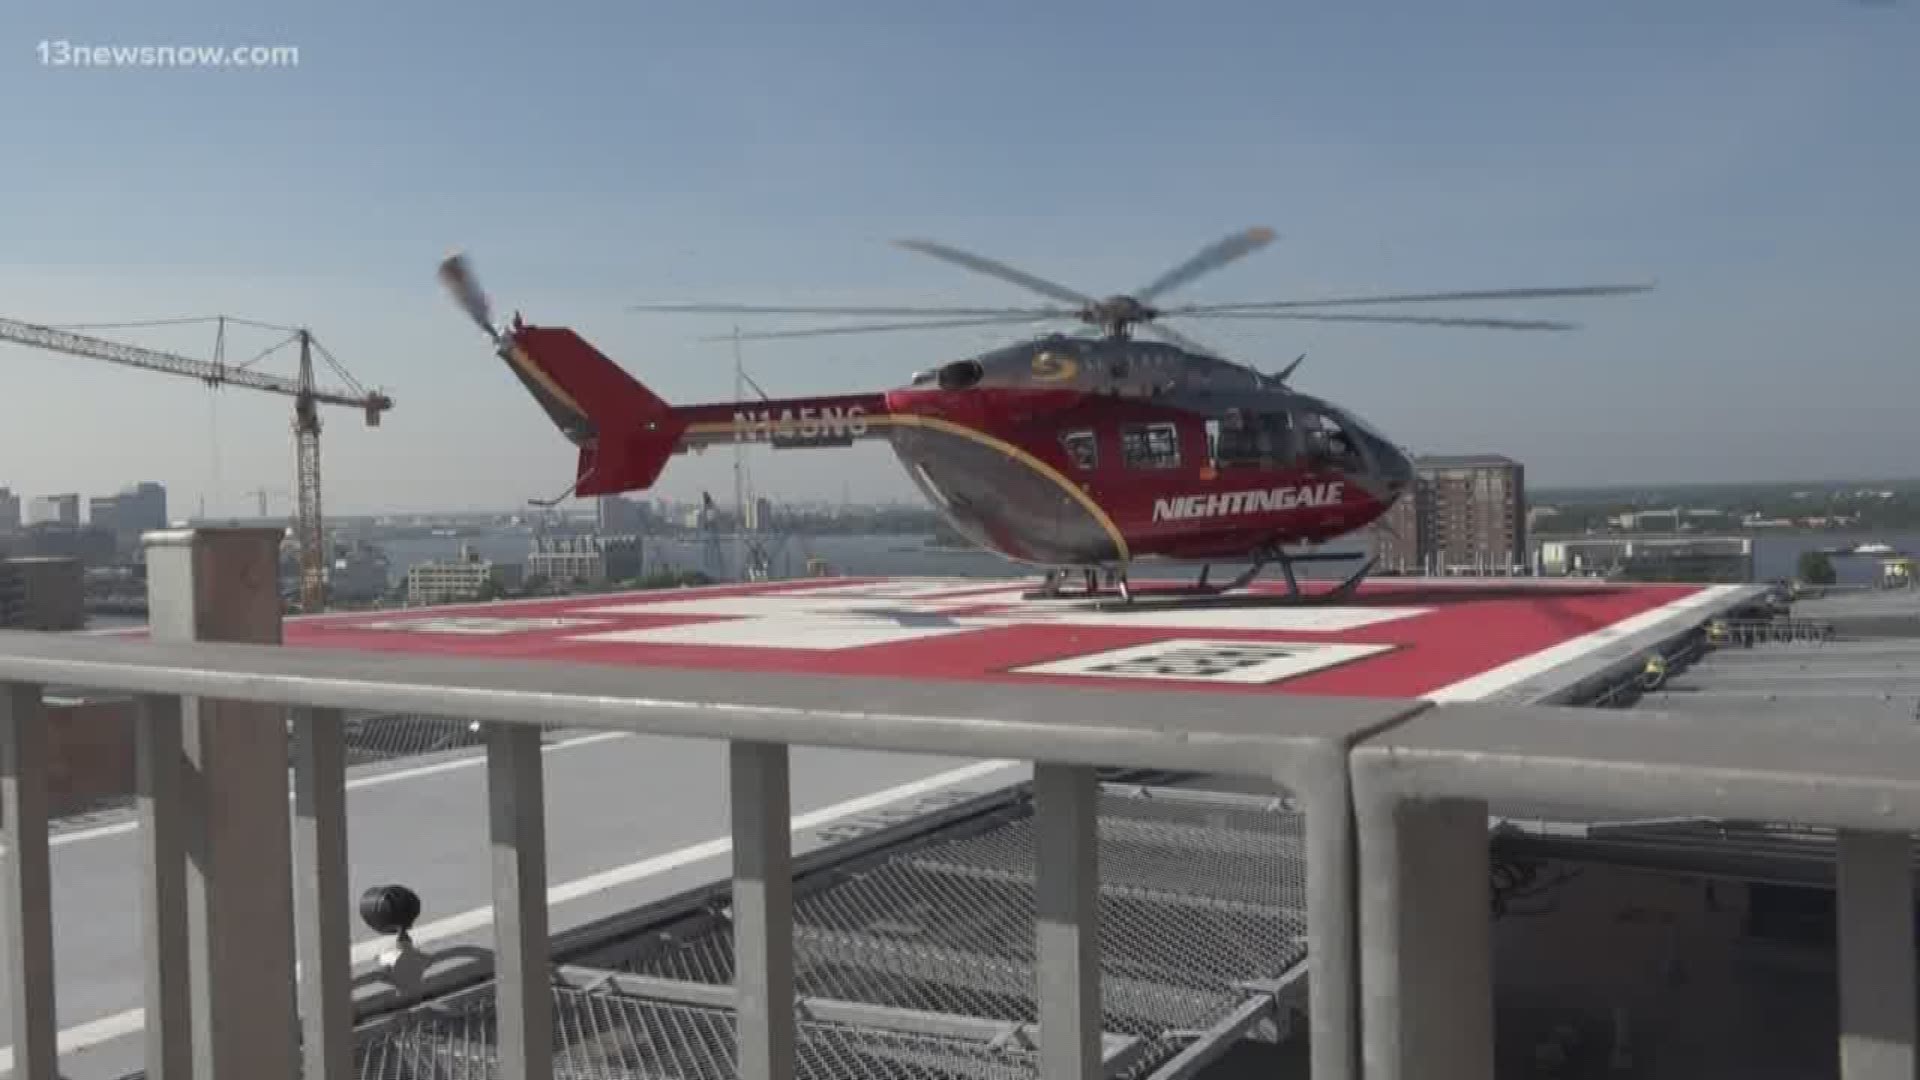 In an emergency, timing is everything. Sometimes, a helicopter is the fastest way to get help.